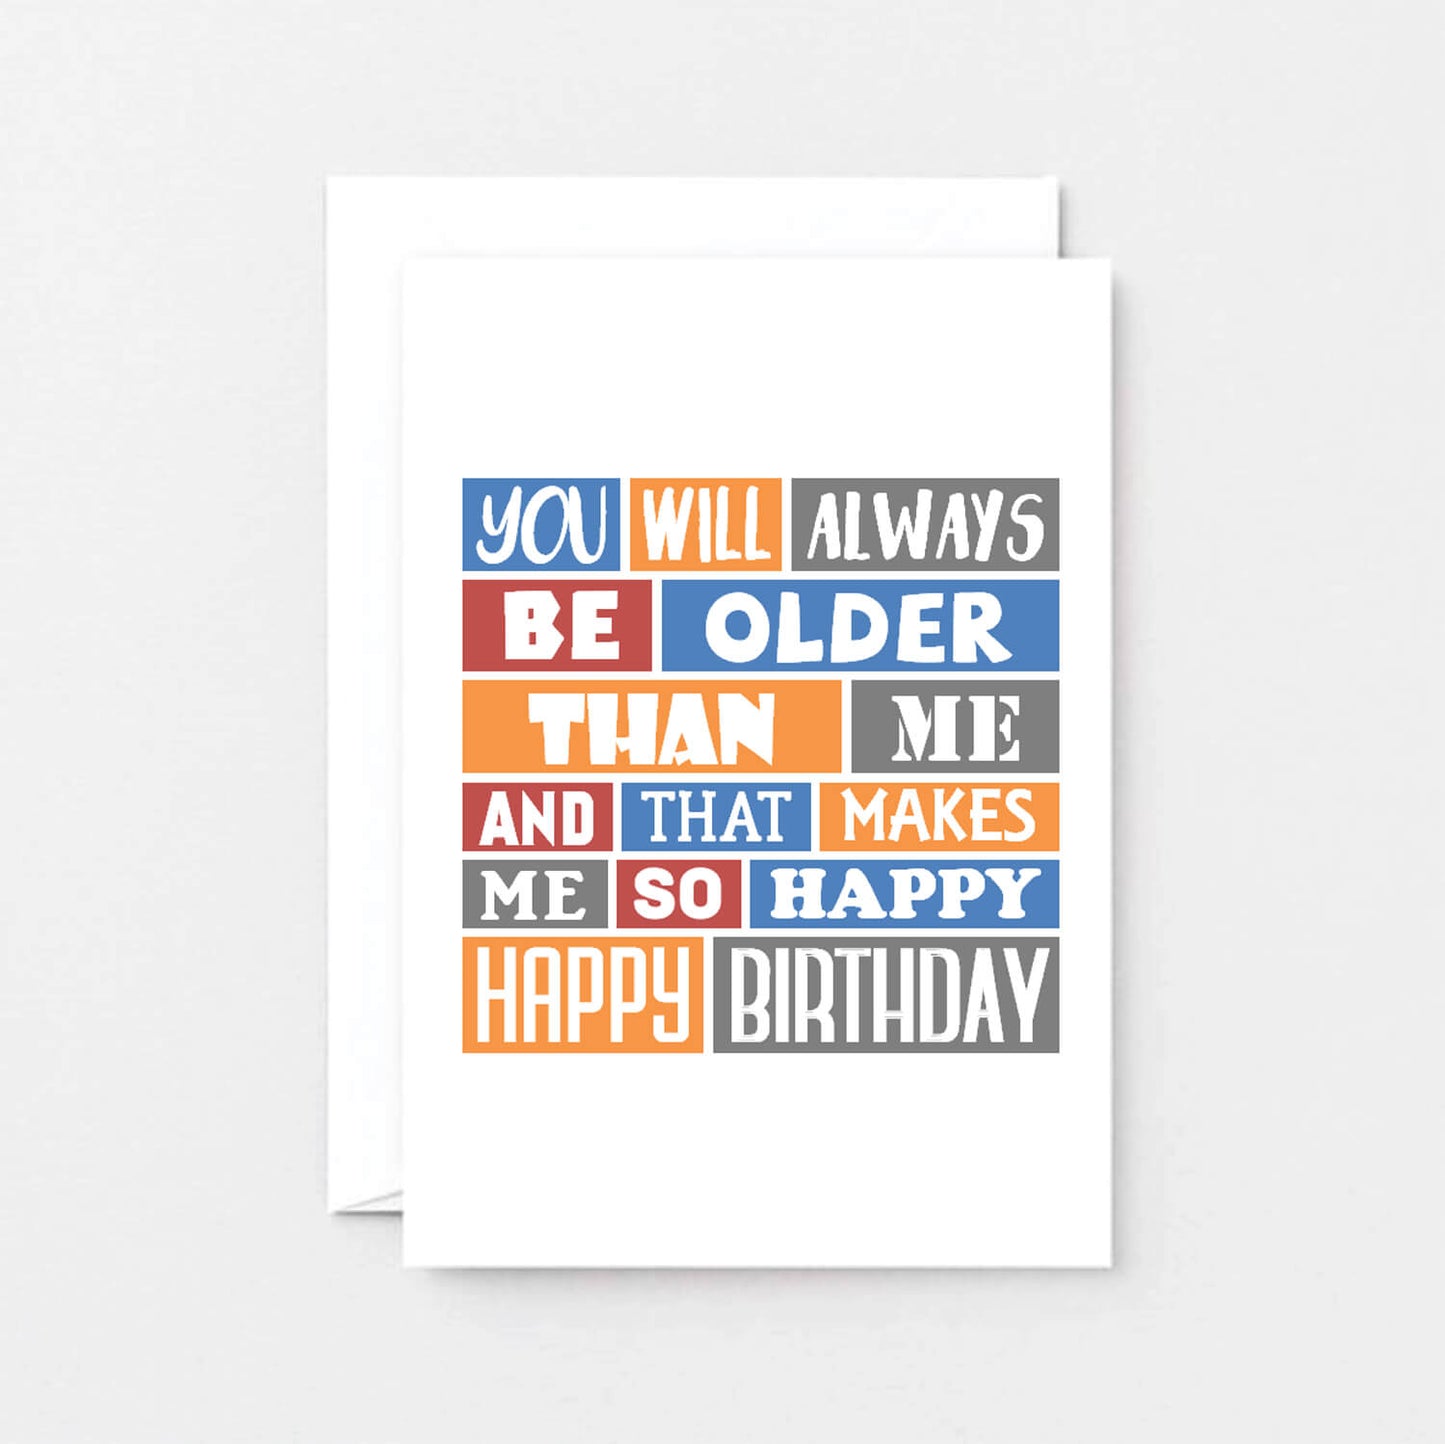 Birthday Card by SixElevenCreations. Reads You will always be older than me and that makes me so happy. Happy birthday. Product Code SE0273A6